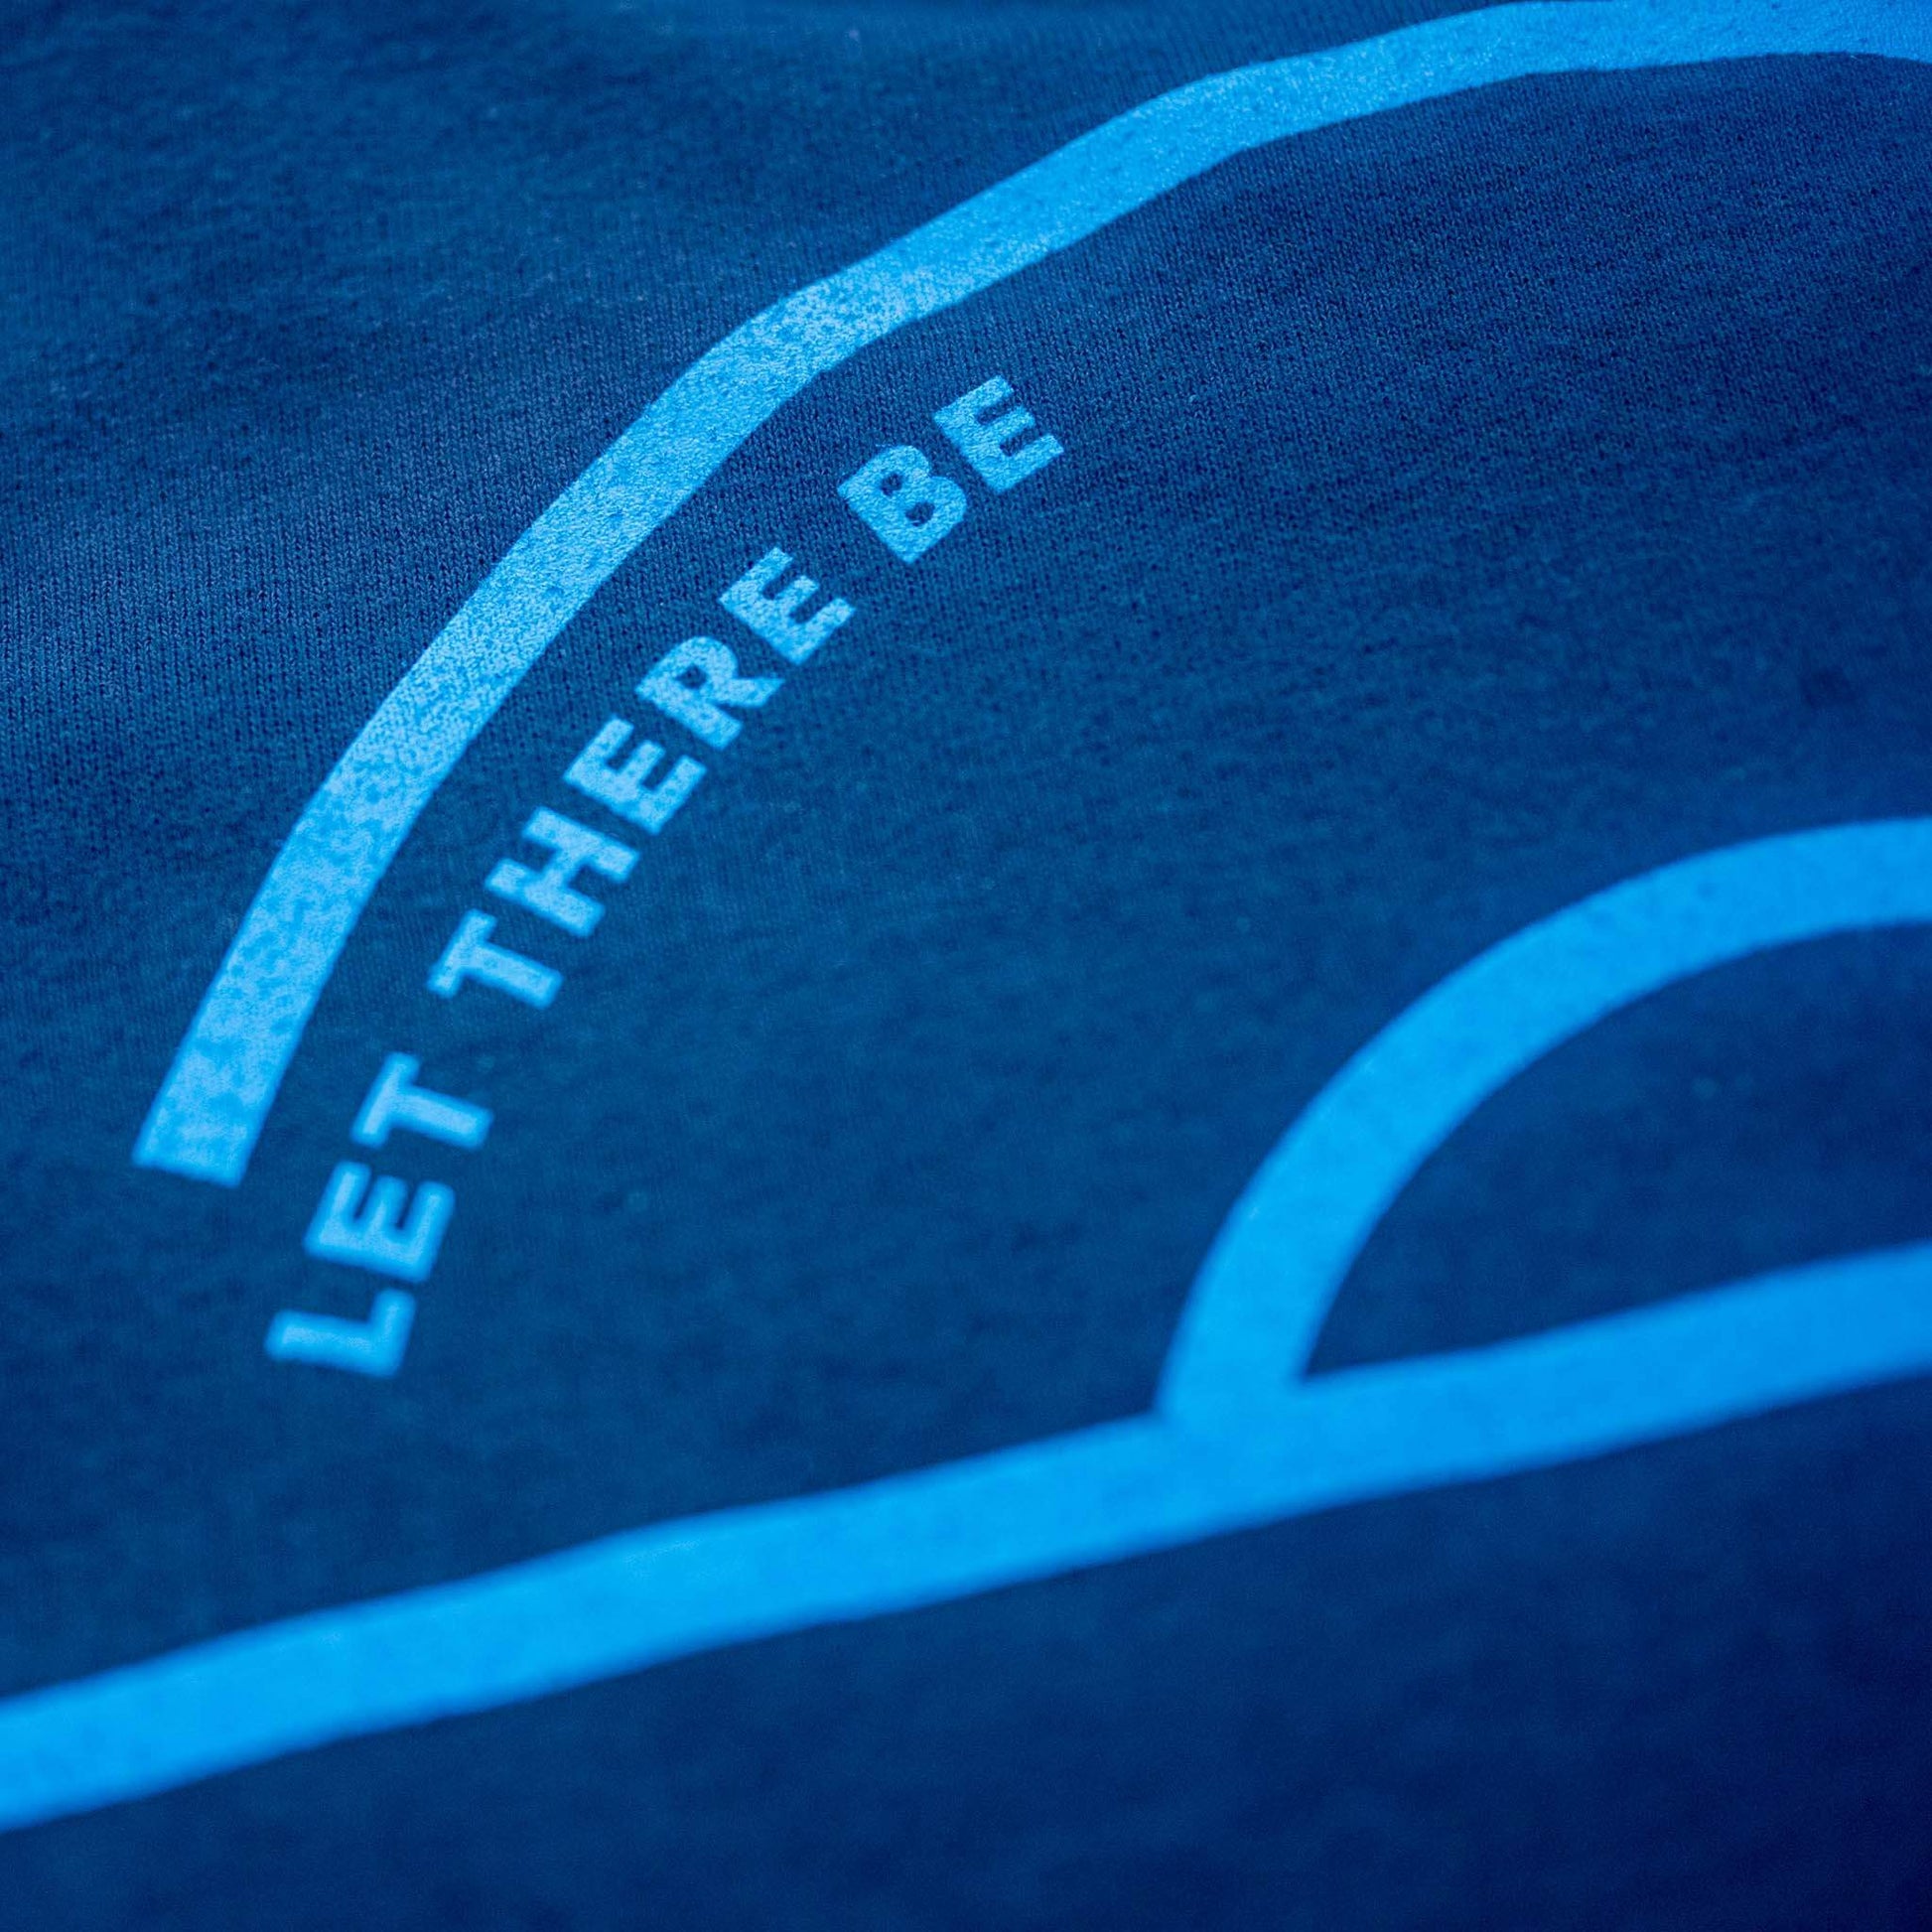 Let there be house graphic detail on navy t-shirt design